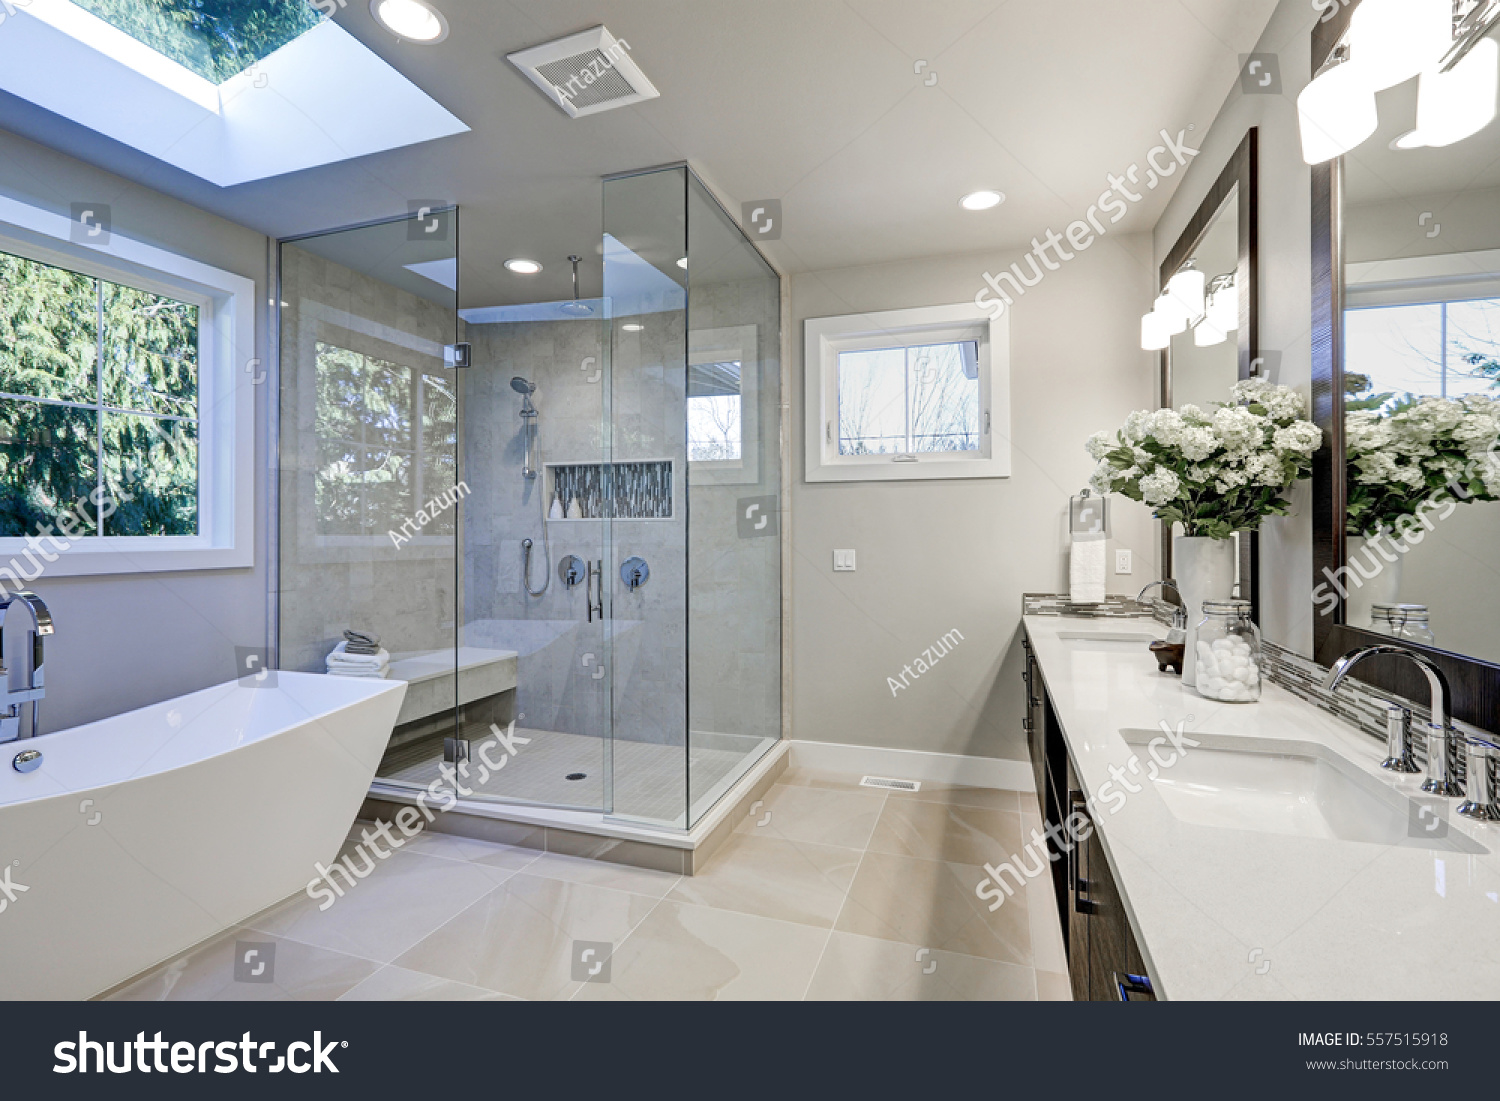 Spacious bathroom in gray tones with heated floors, freestanding tub, walk-in shower, double sink vanity and skylights. Northwest, USA #557515918